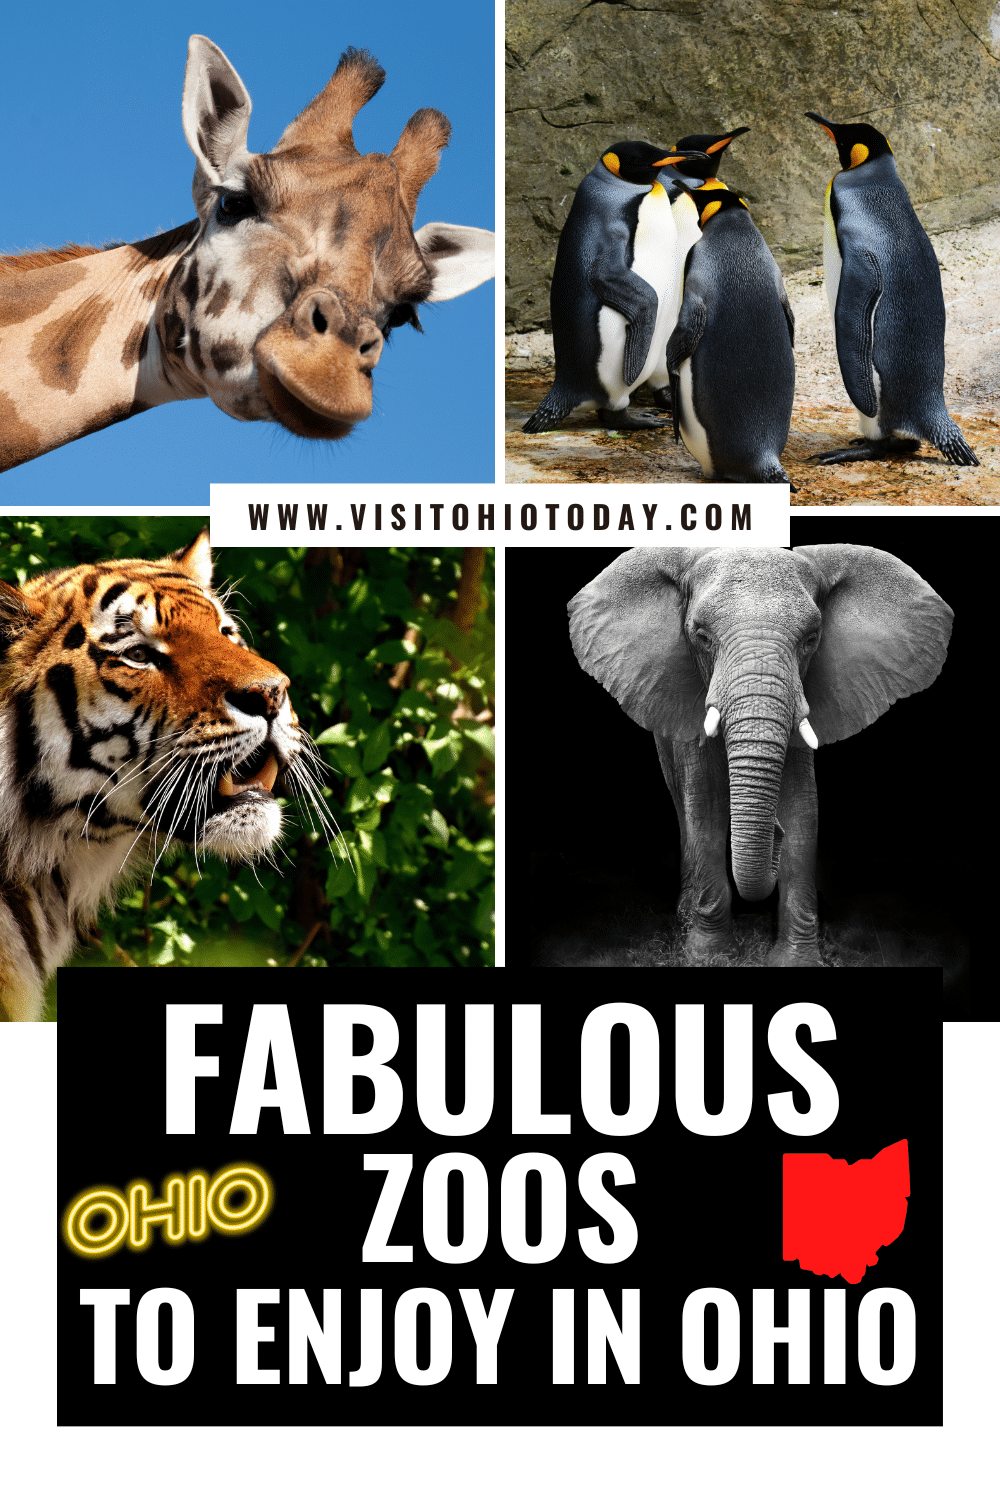 4 images of animals Top left is a giraffe, top right a group of 4 penguins, bottom left is a tiger and bottom right is an elephant. Text overlay says fabuous zoos to enjoy in ohio